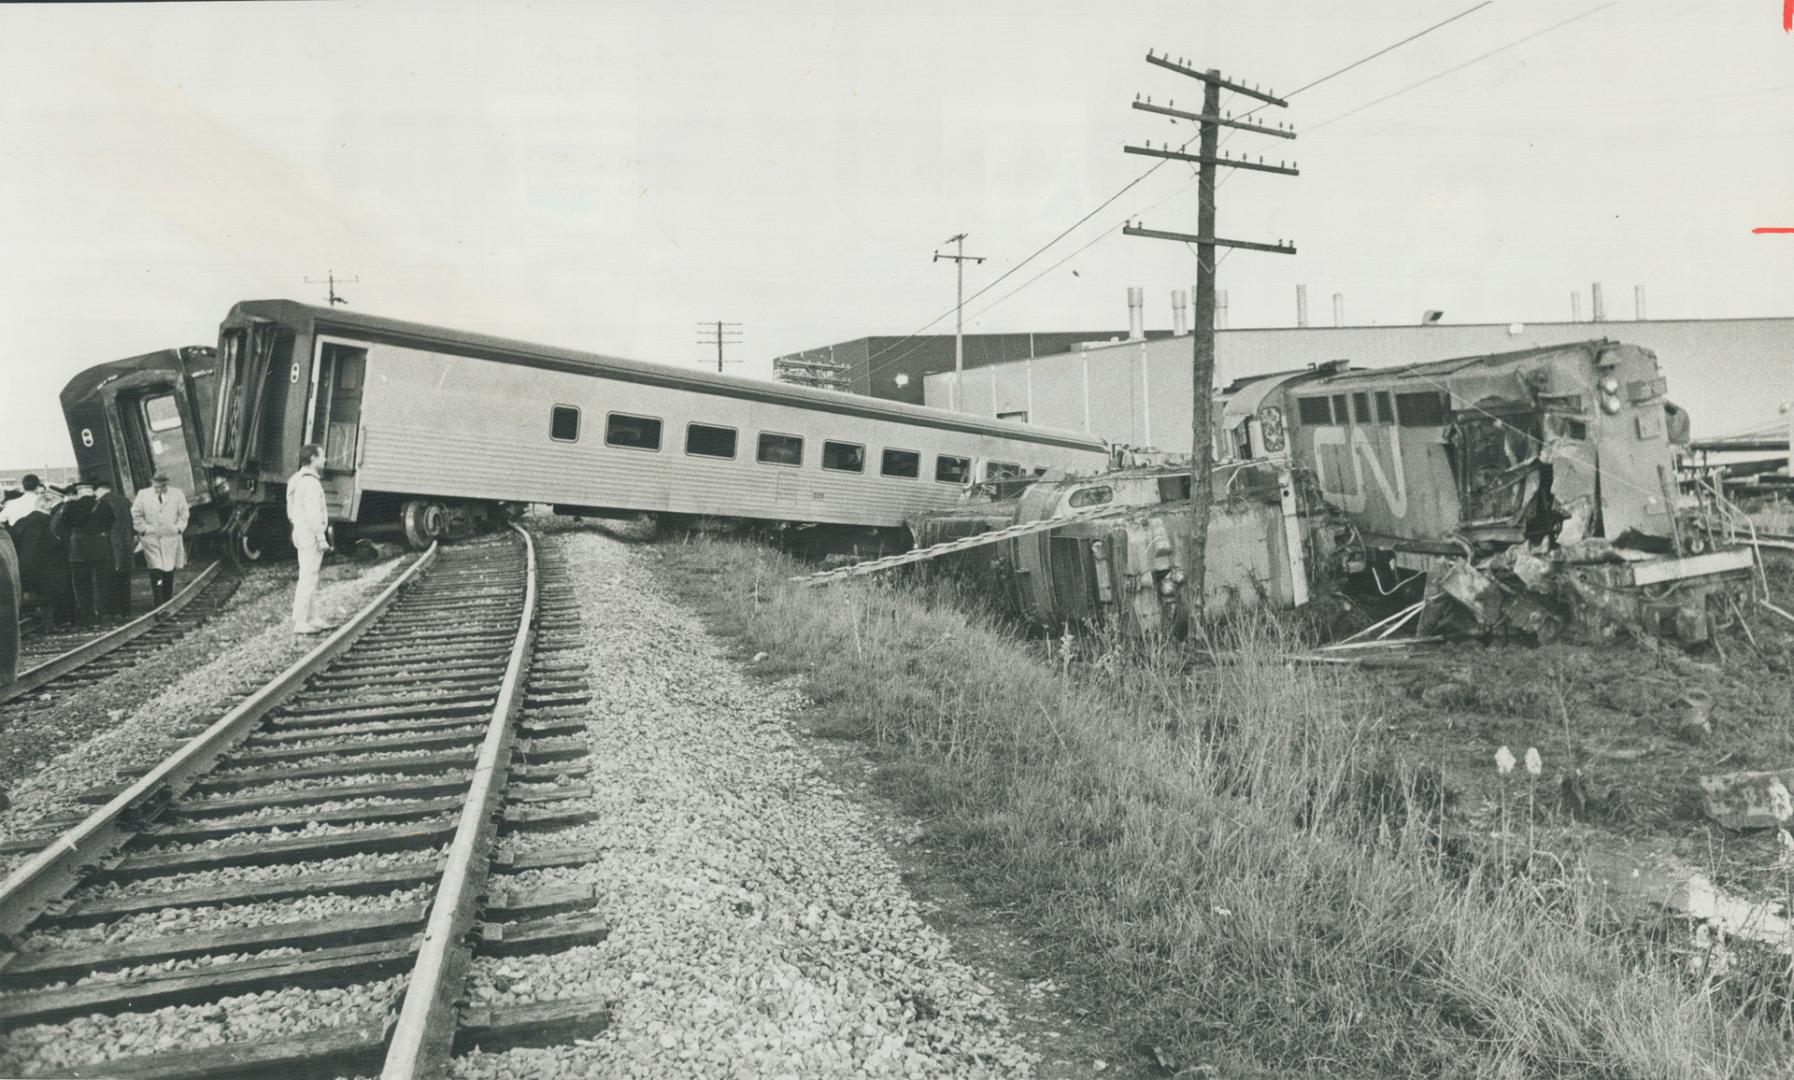 Smashed and tangled, wreckage of drailed CNR Tempo train lies scattered across the railway right-of-way year Woodbine Racetrack after running through (...)